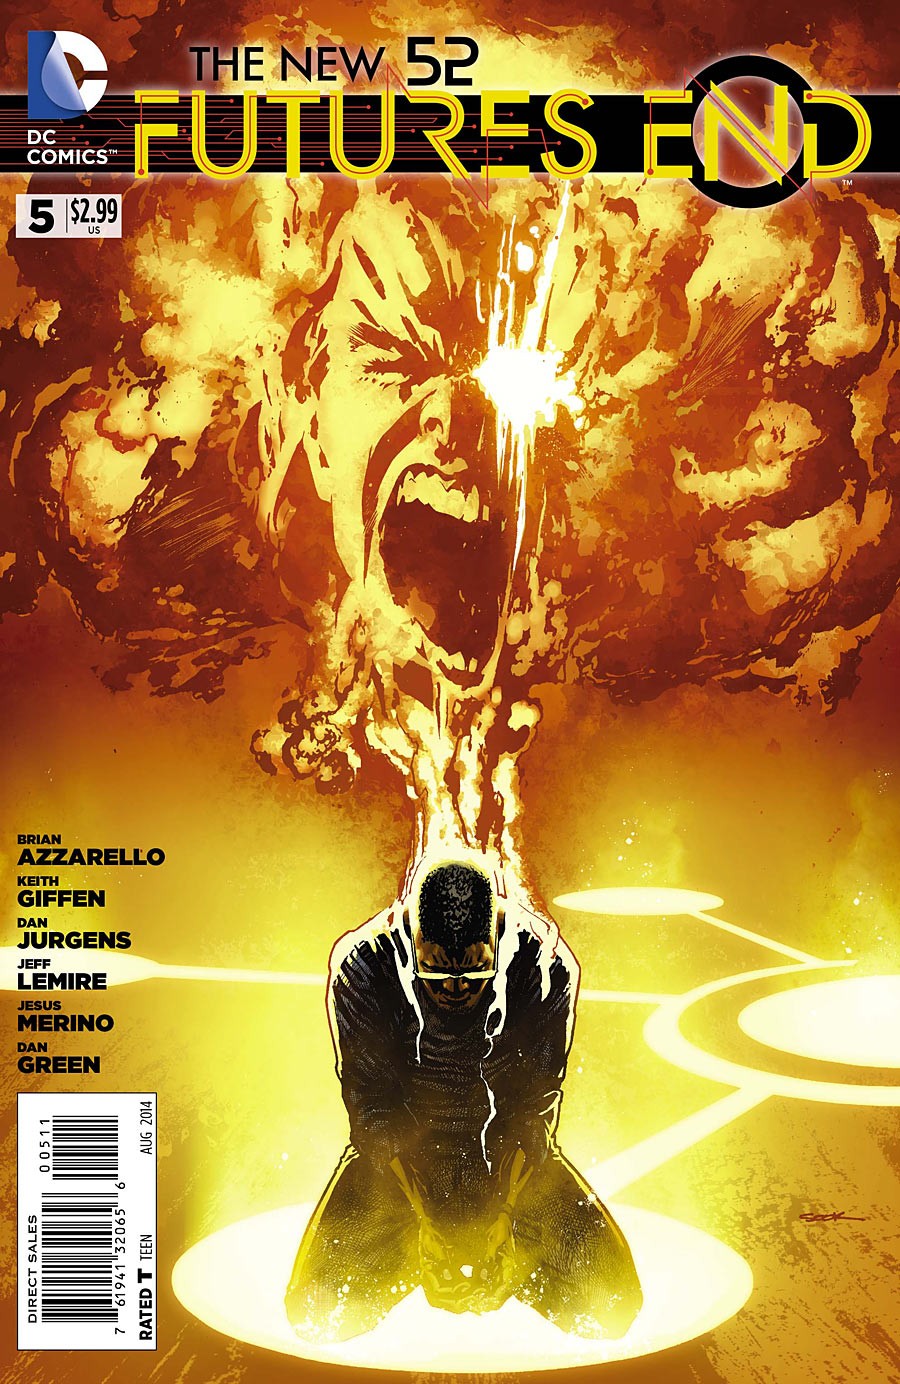 The New 52: Futures End Vol. 1 #5